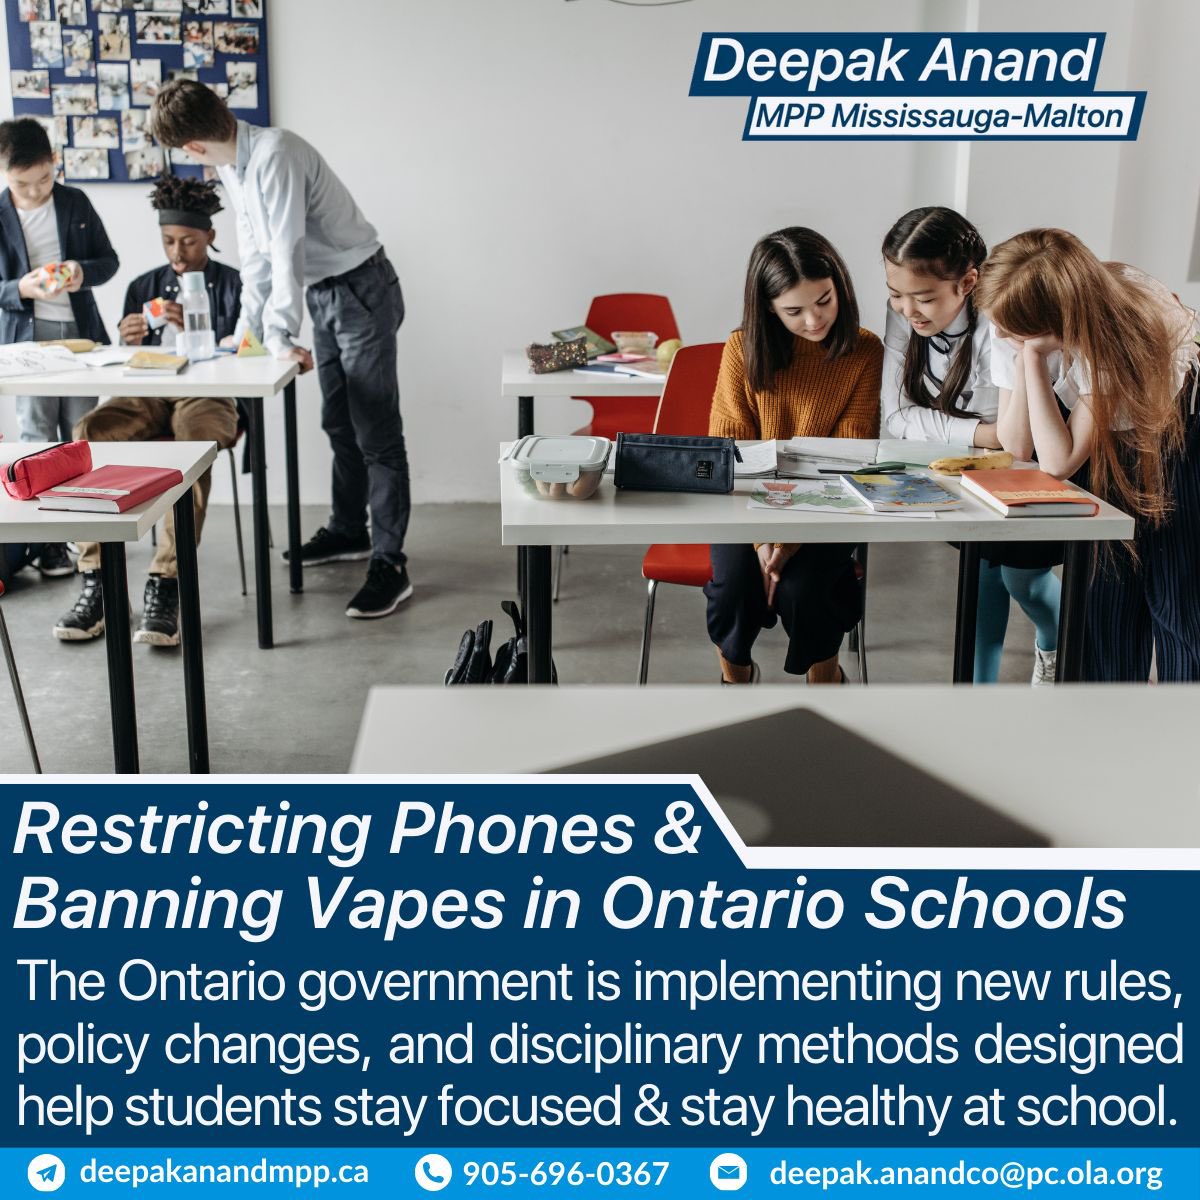 Our govt is #WorkingTogether to ensure students are provided with the best educational experiences. That’s why we’re: -Banning cellphones for JK-G6 -Restricting phone usage for older students -Zero Tolerance ban on tobacco/vapes/drugs on school property bit.ly/3wg2EuF